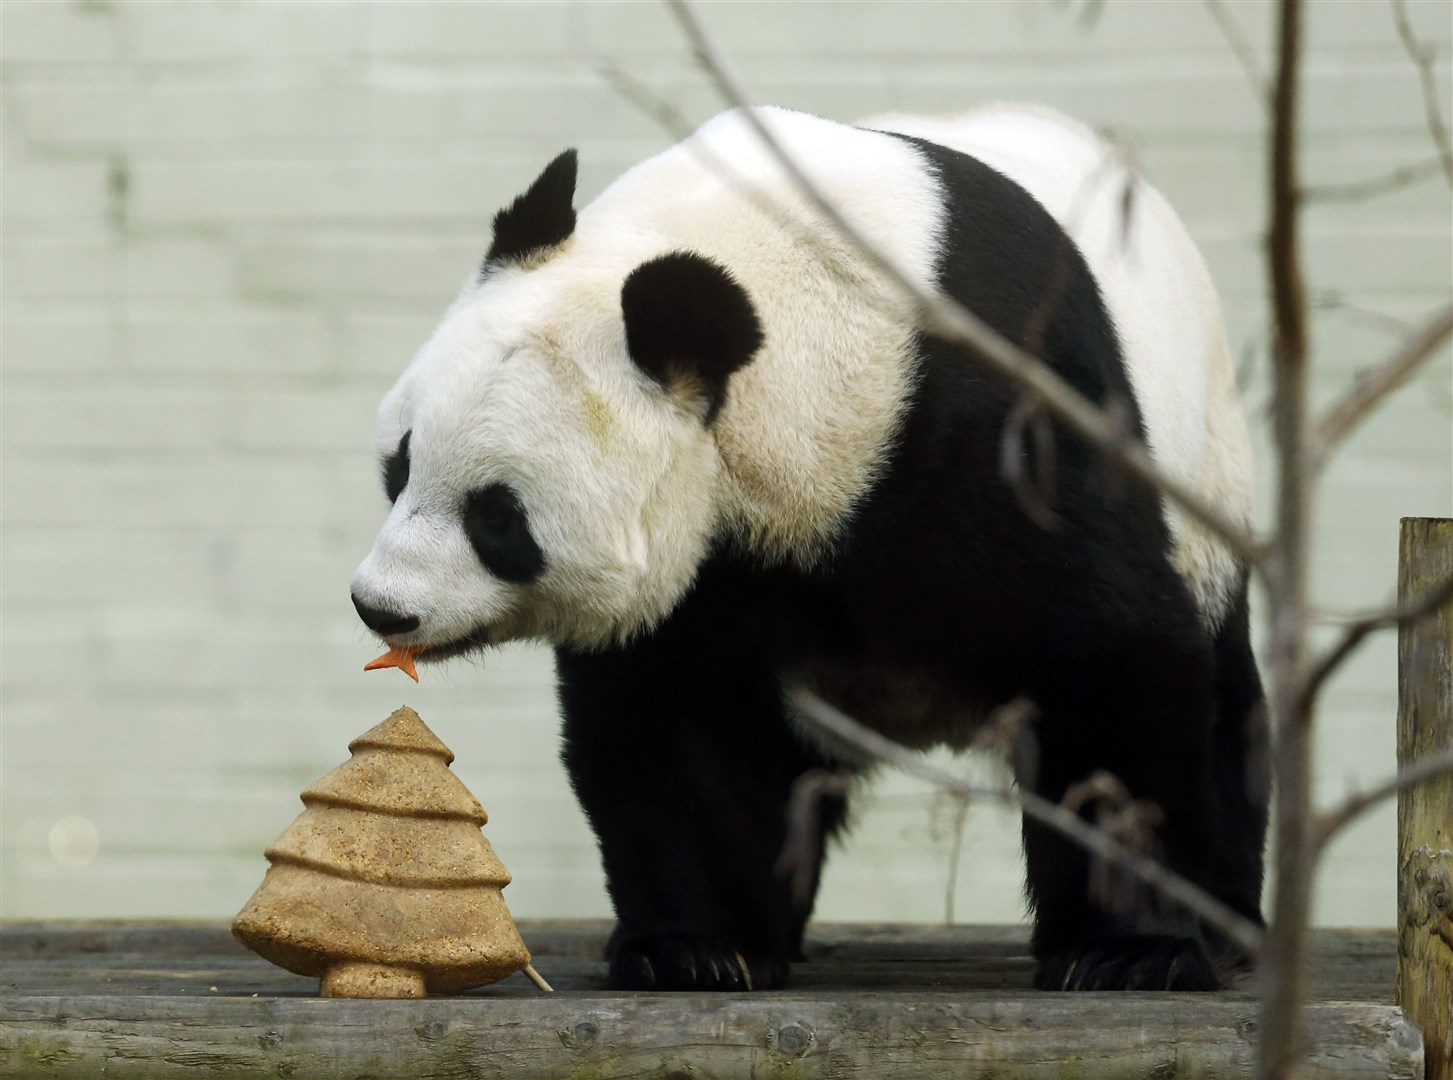 Tian Tian the giant panda with a special Christmas cake in the shape of a Christmas tree at Edinburgh Zoo (Danny Lawson/PA)